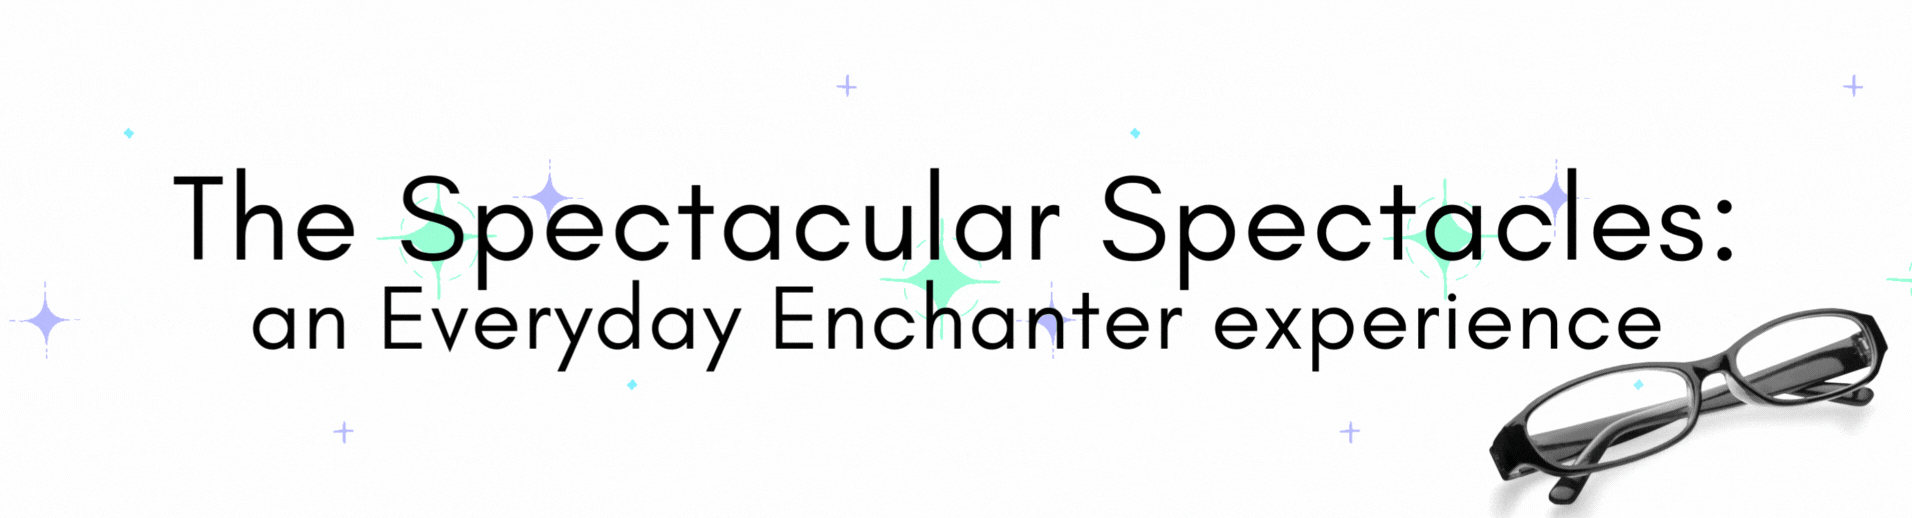 The Spectacular Spectacles: an Everyday Enchanter experience